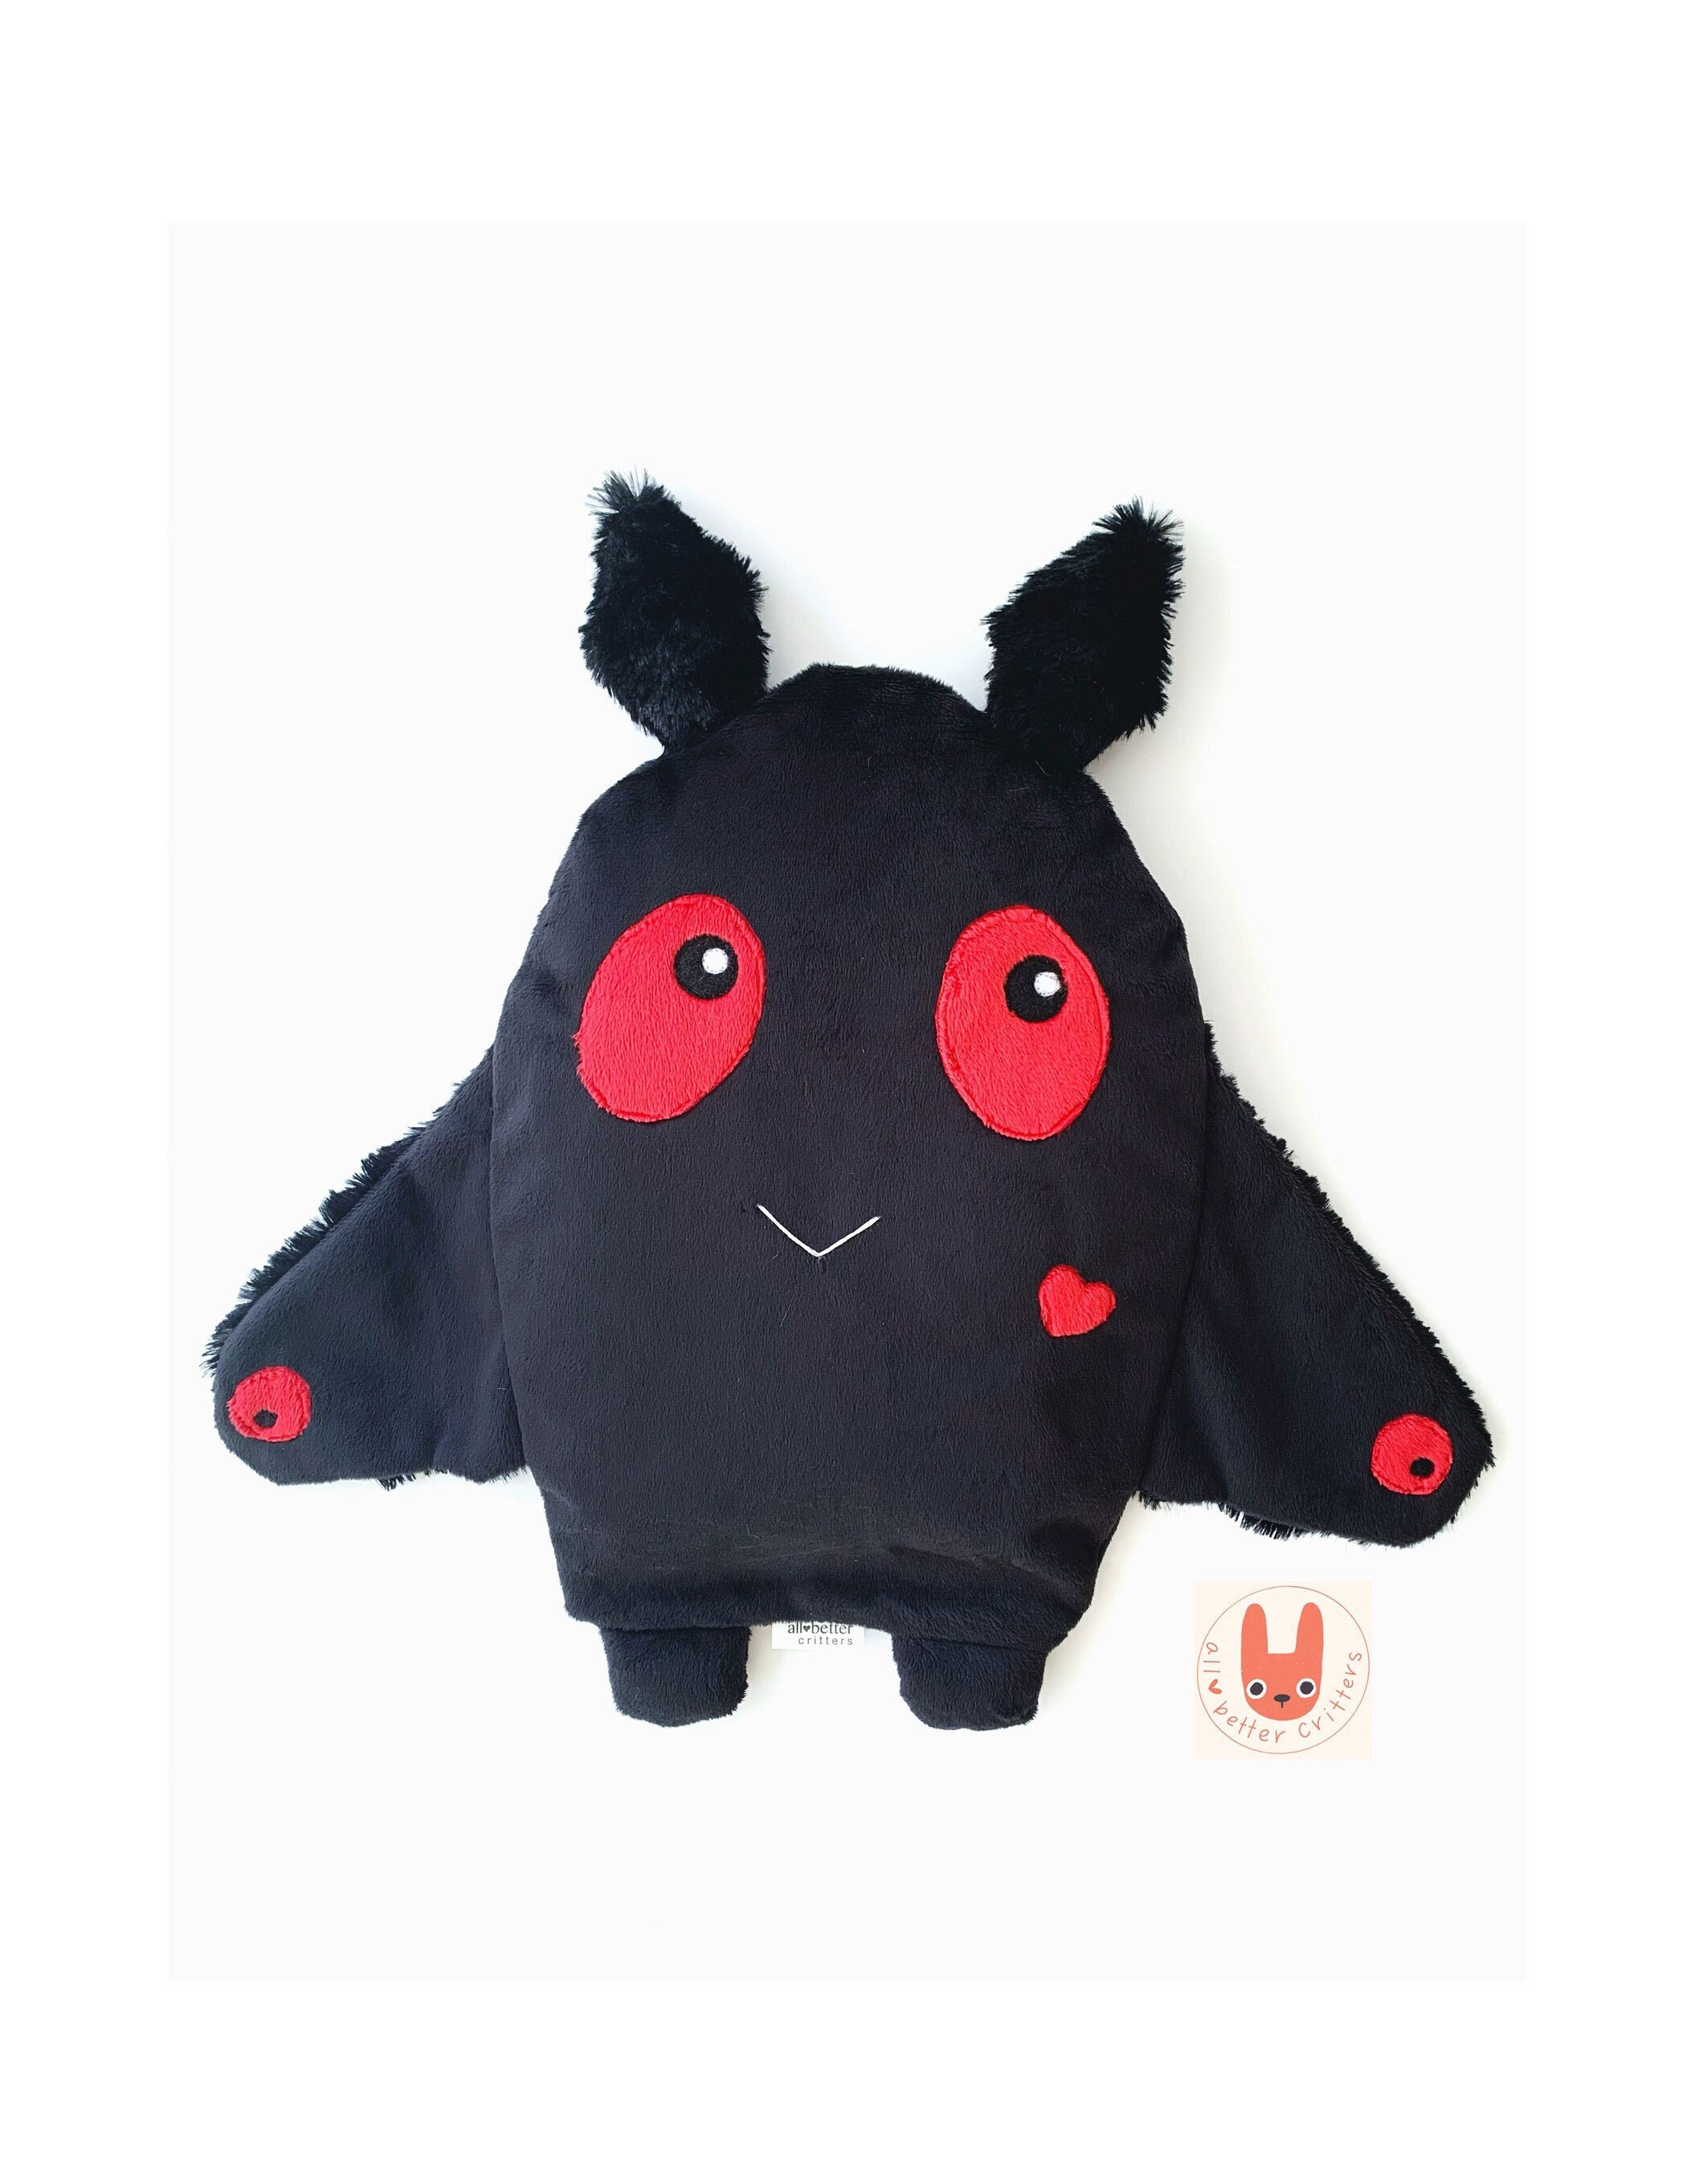 Cute Mothman Hot Cold Plush | MADE TO ORDER Cryptid | Washable Weighted Heating Pad | Handmade Hug Animal | Unique Relaxation Friend Gift